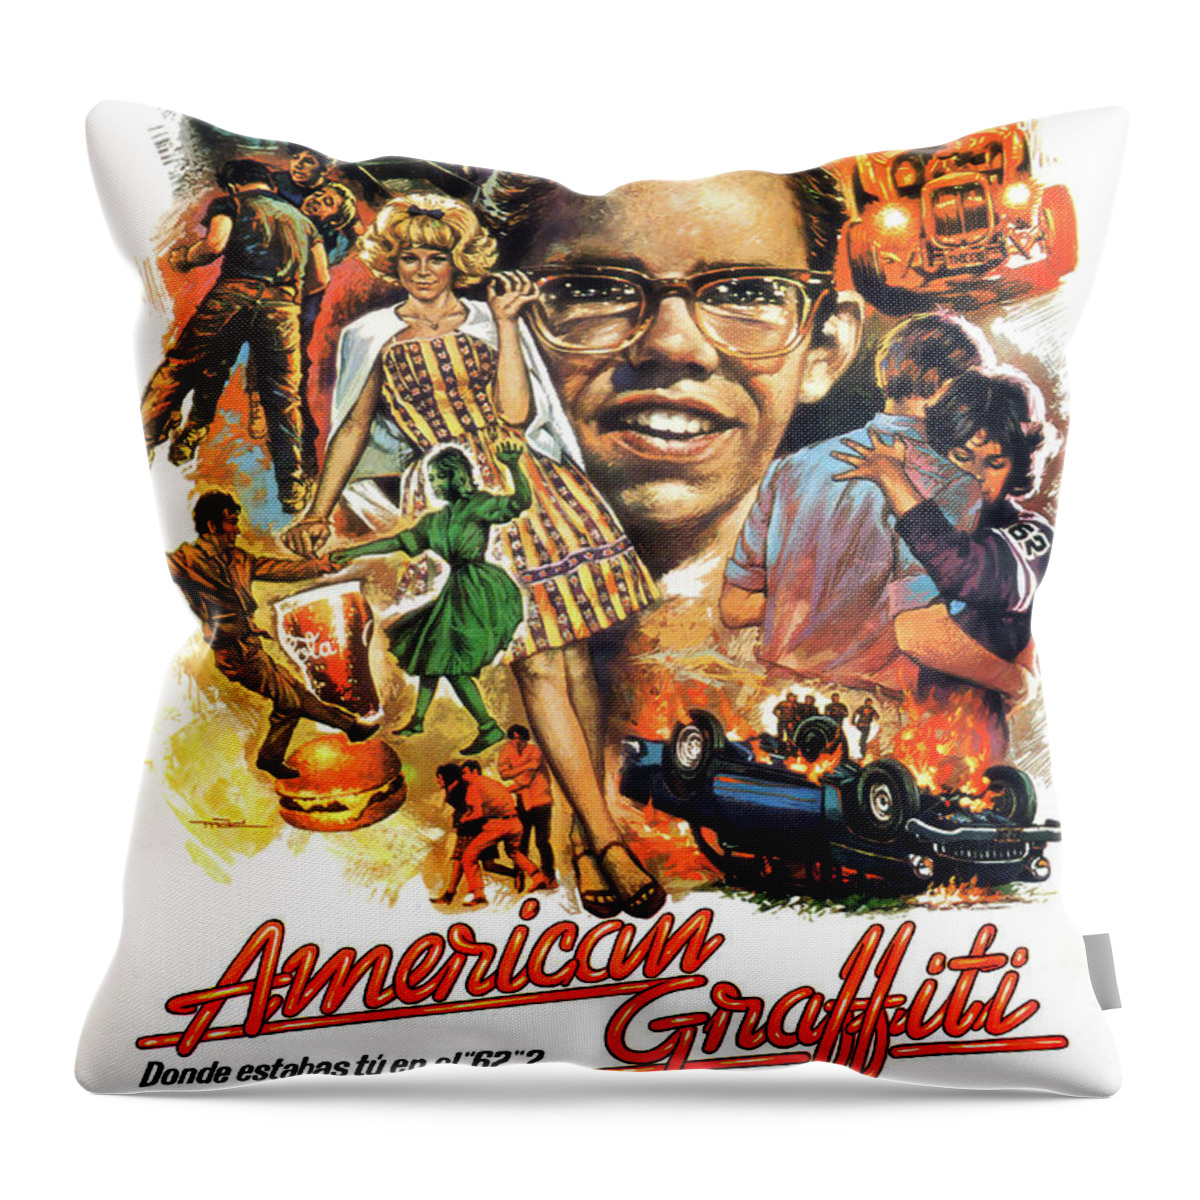 Quibus Throw Pillow featuring the mixed media ''American Graffiti'', 1973 - art by Macario Quibus by Movie World Posters